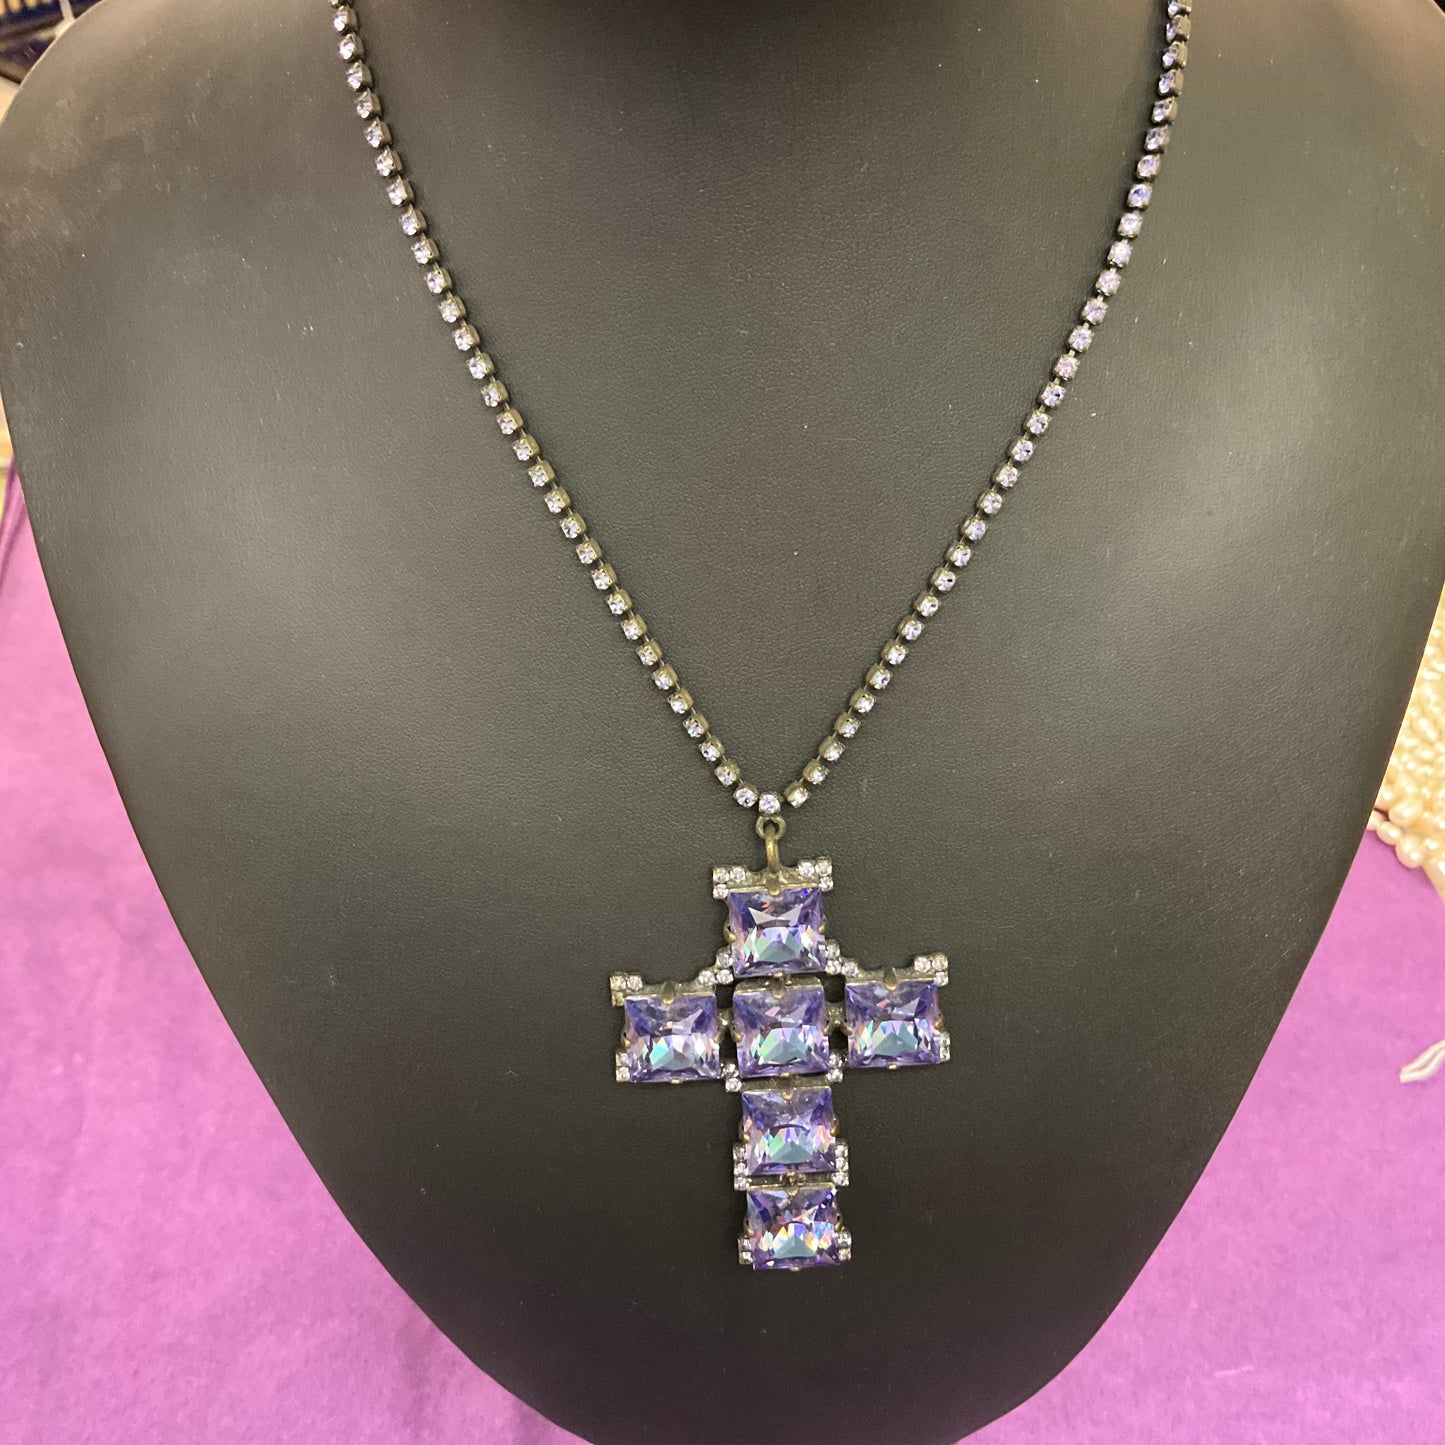 Vintage Purple Rhinestone and Crystal Crucifix Necklace By Butler and Wilson